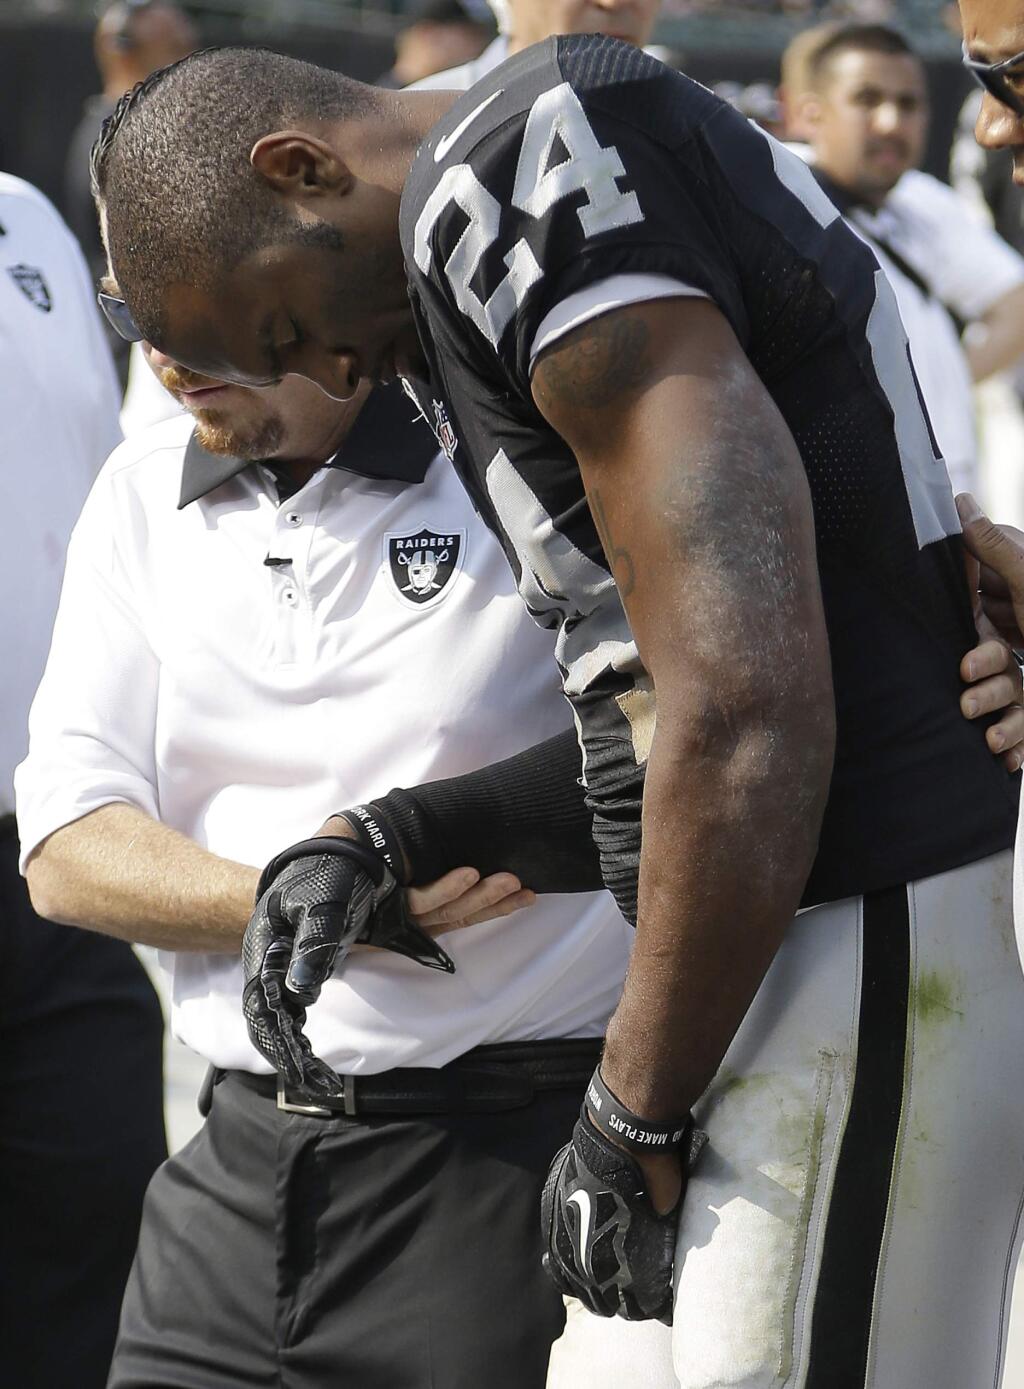 Oakland Raiders cornerback Charles Woodson (24) is helped to the sideline after being injured during the second half of an NFL football game against the Cincinnati Bengals in Oakland, Calif., Sunday, Sept. 13, 2015. The Bengals won 33-13. (AP Photo/Ben Margot)